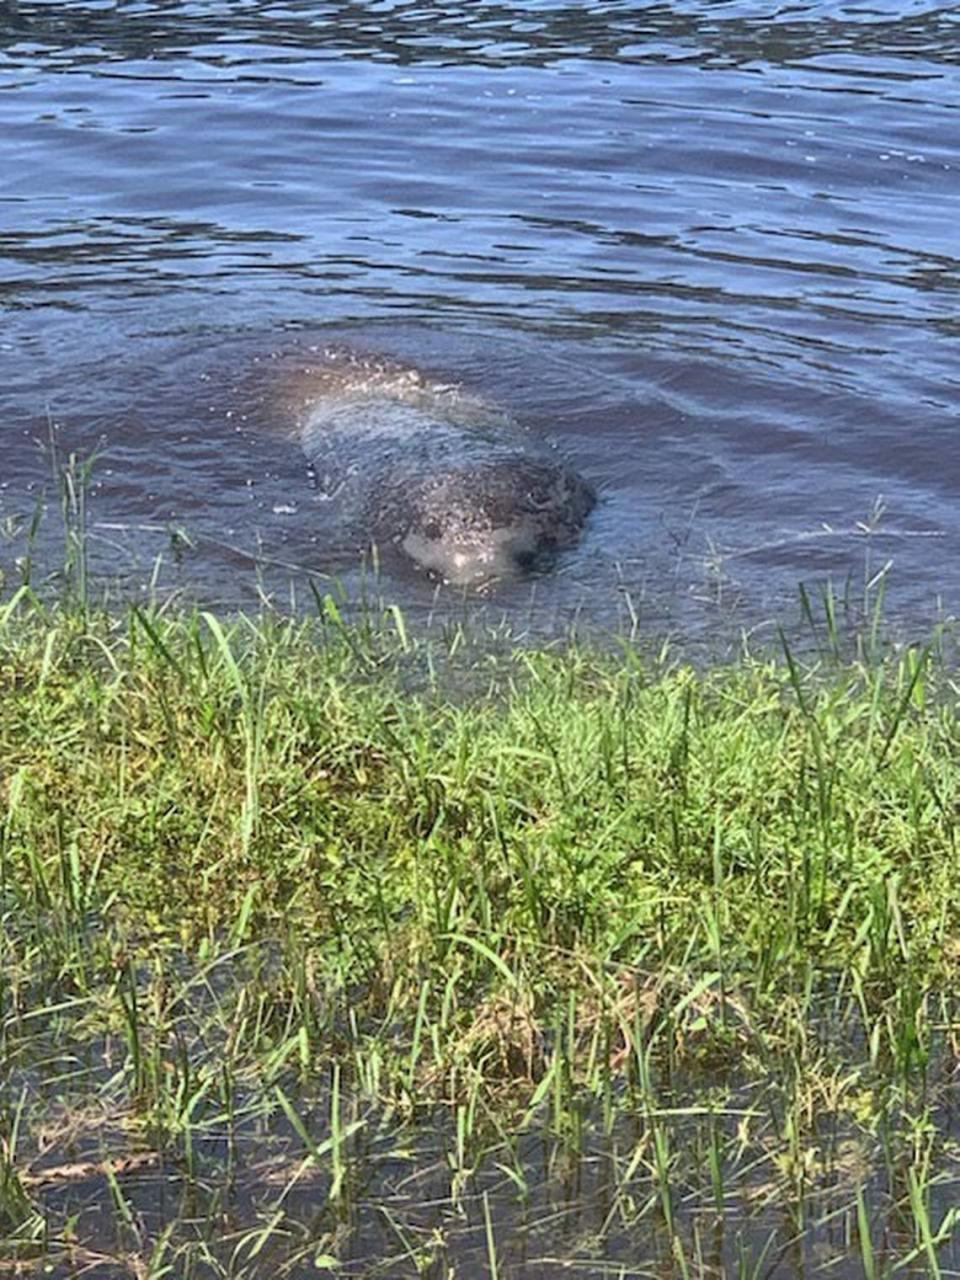 A manatee was spotted Sept. 4 in the Intracoastal Waterway in the Myrtle Beach area. Brandelyn Breinig was able to see the manatee eating grasses before it swam away. Sept. 5, 2023